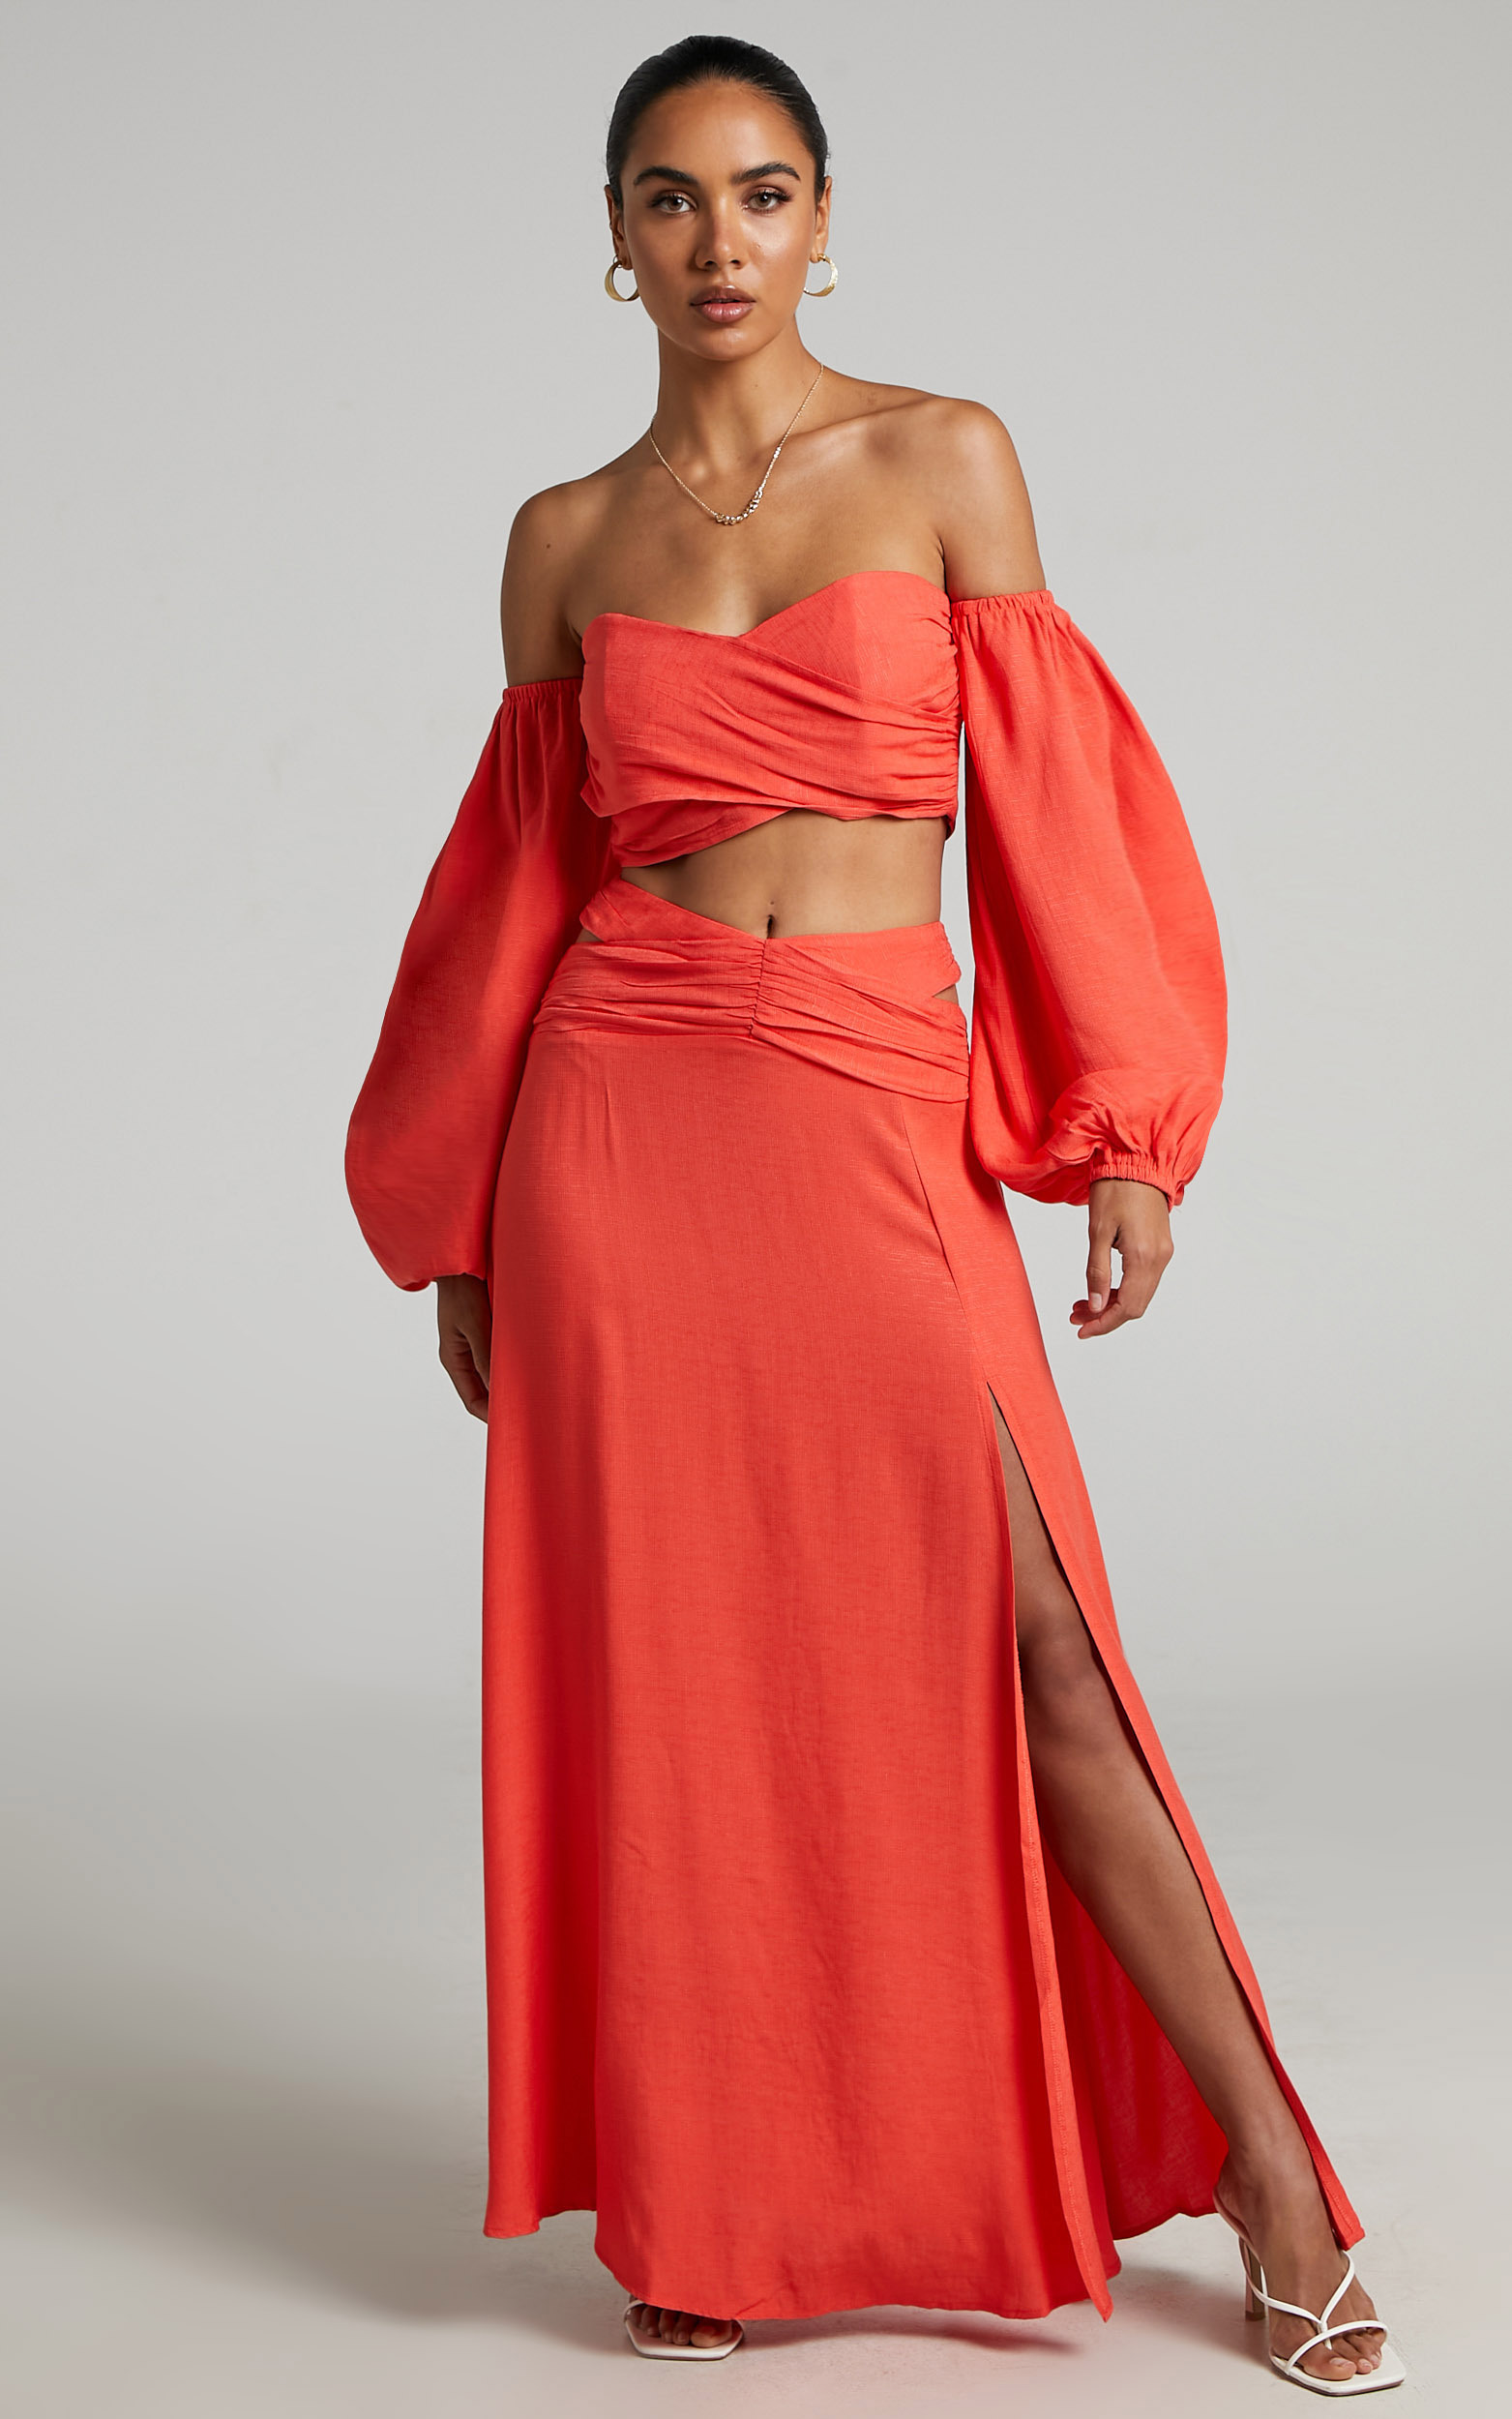 RUNAWAY THE LABEL - EMBER MAXI SKIRT in Fire - L, ORG1, hi-res image number null